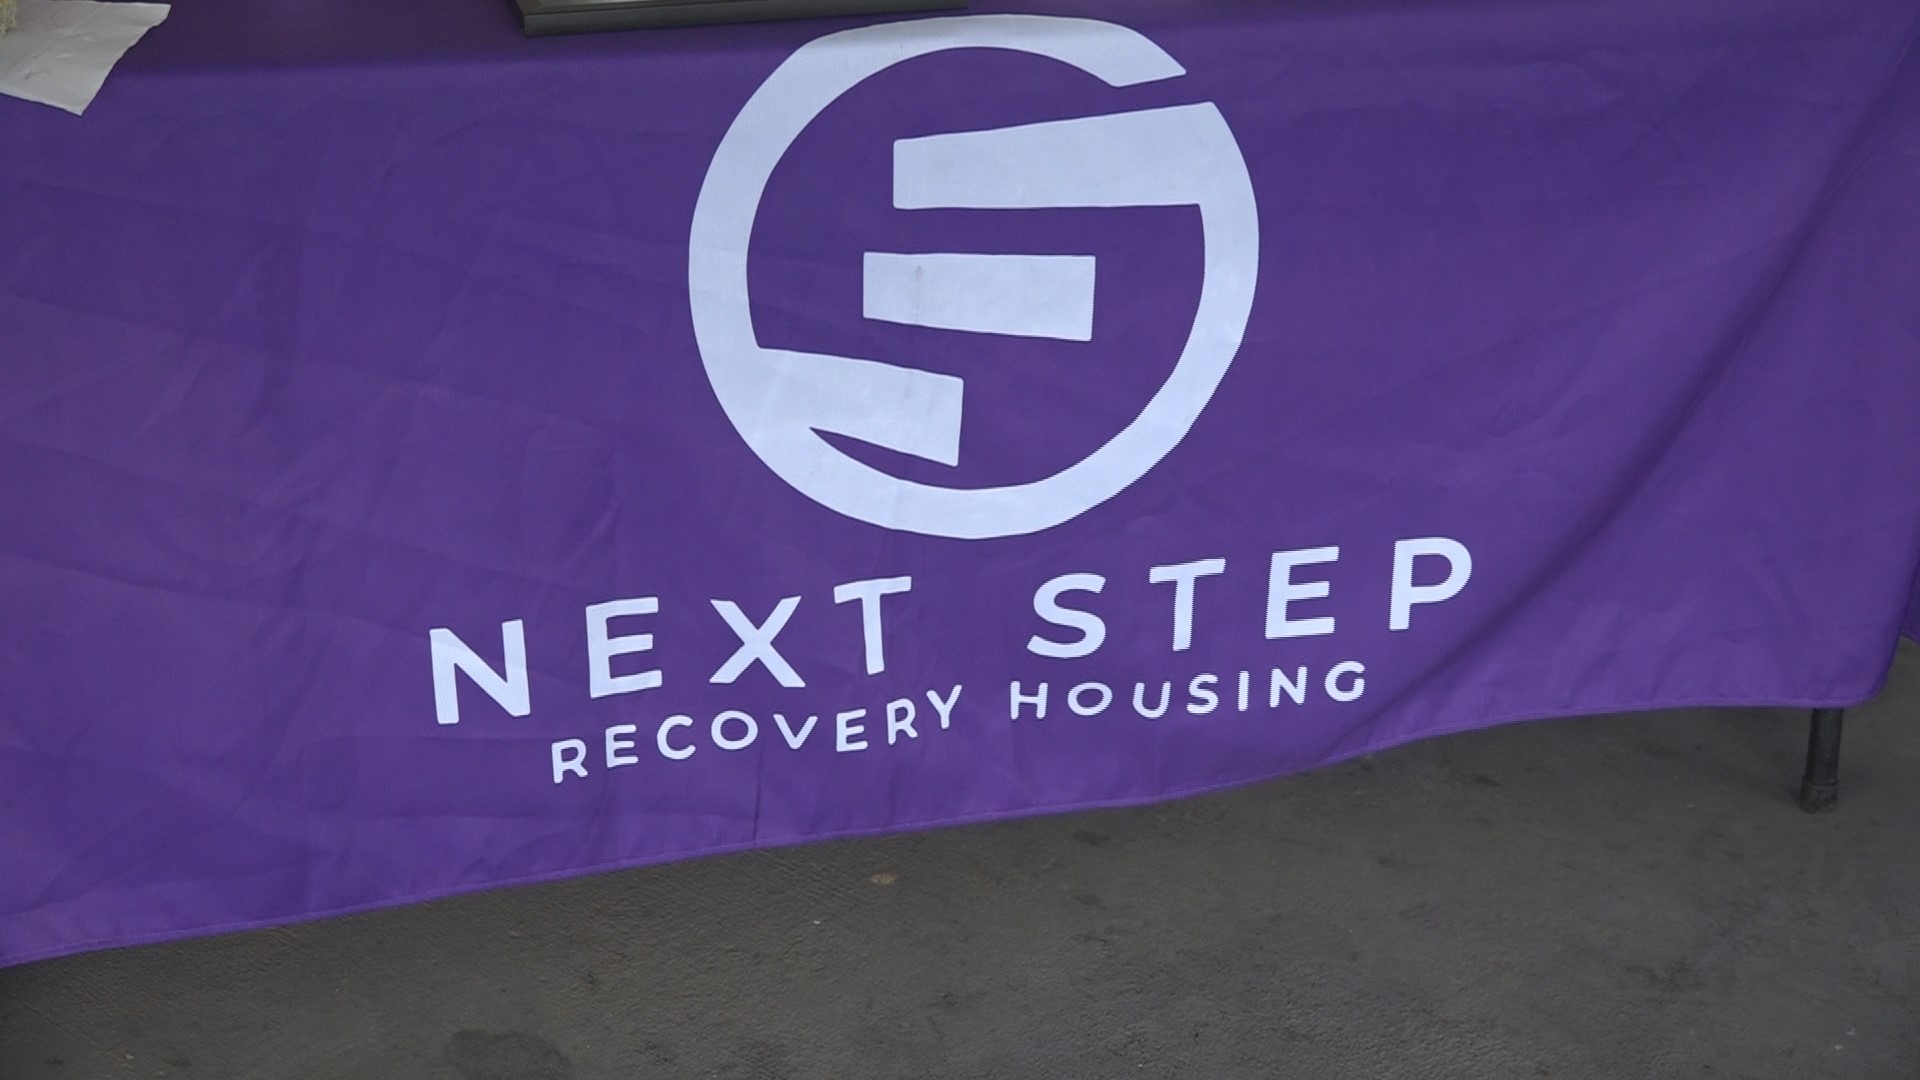 Joseph Cruz, the housing director who recently celebrated a decade of recovery says that even with 30 more spots, Next Step still has a waitlist.